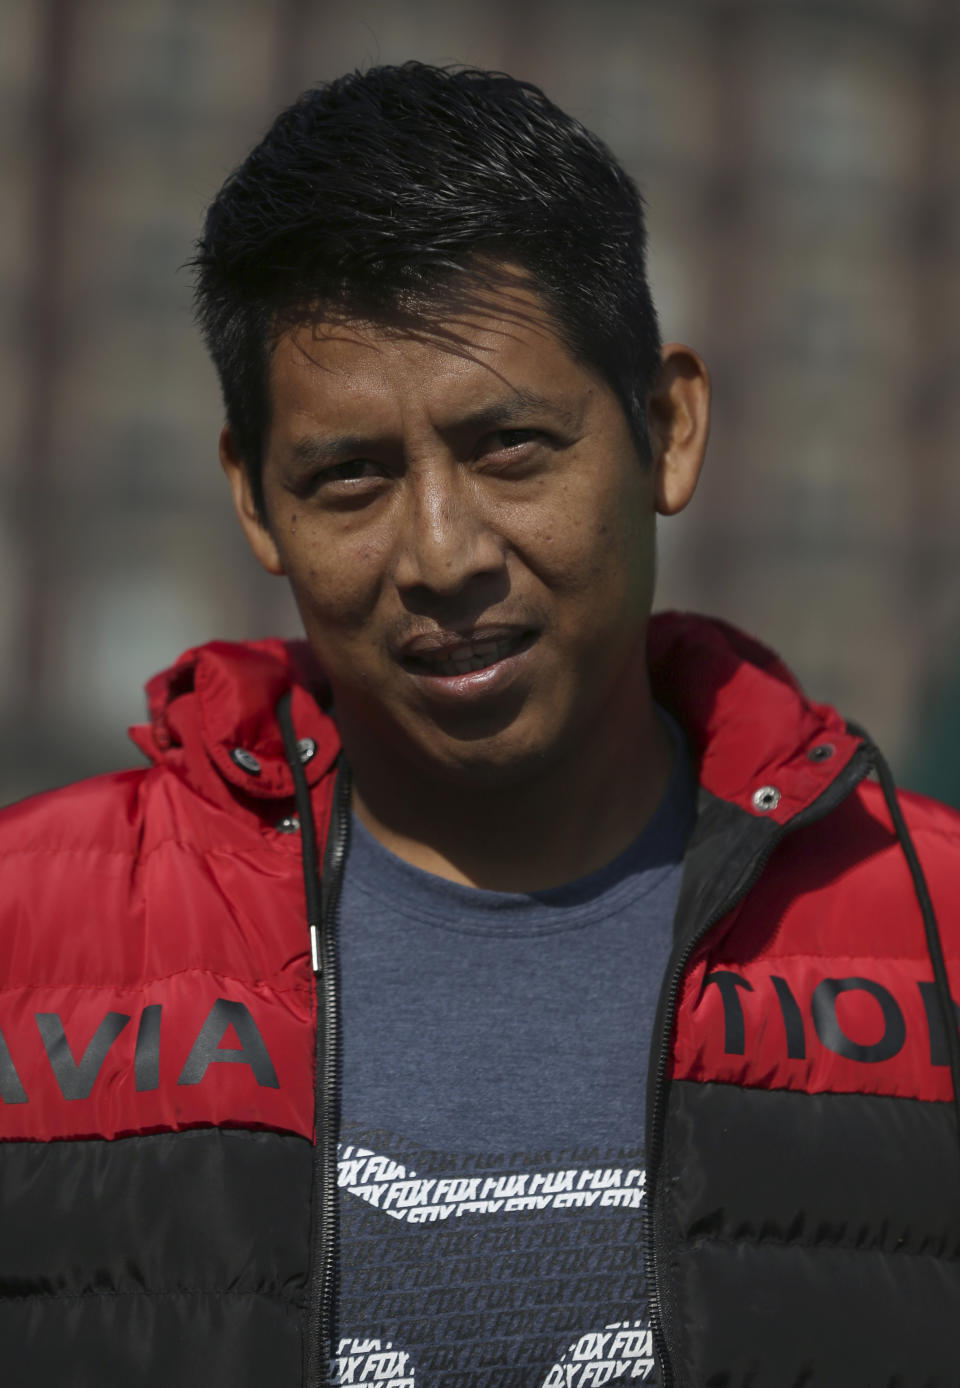 Damian Banuelos poses for a photo during an interview in the Zocalo in Mexico City, Friday, Nov. 29, 2019. Banuelos is a Huichol artisan from the mountains of Nayarit, a state on the Pacific coast, who feels that the Mexican president is far more accessible and in touch with the people than his predecessors. (AP Photo/Marco Ugarte)